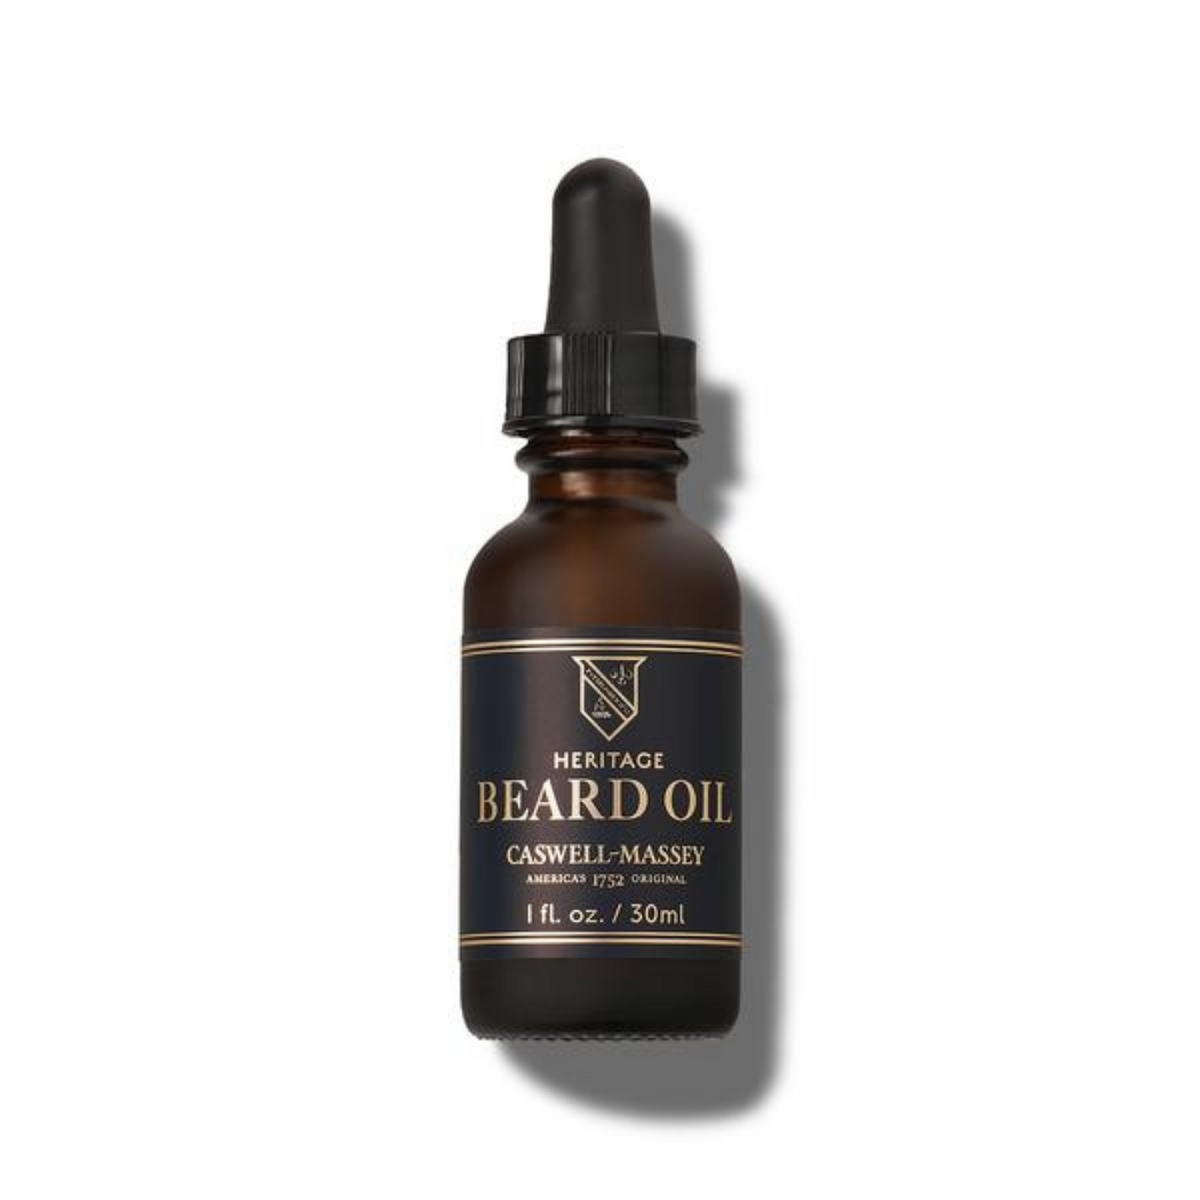 Primary Image of Heritage Face and Beard Oil